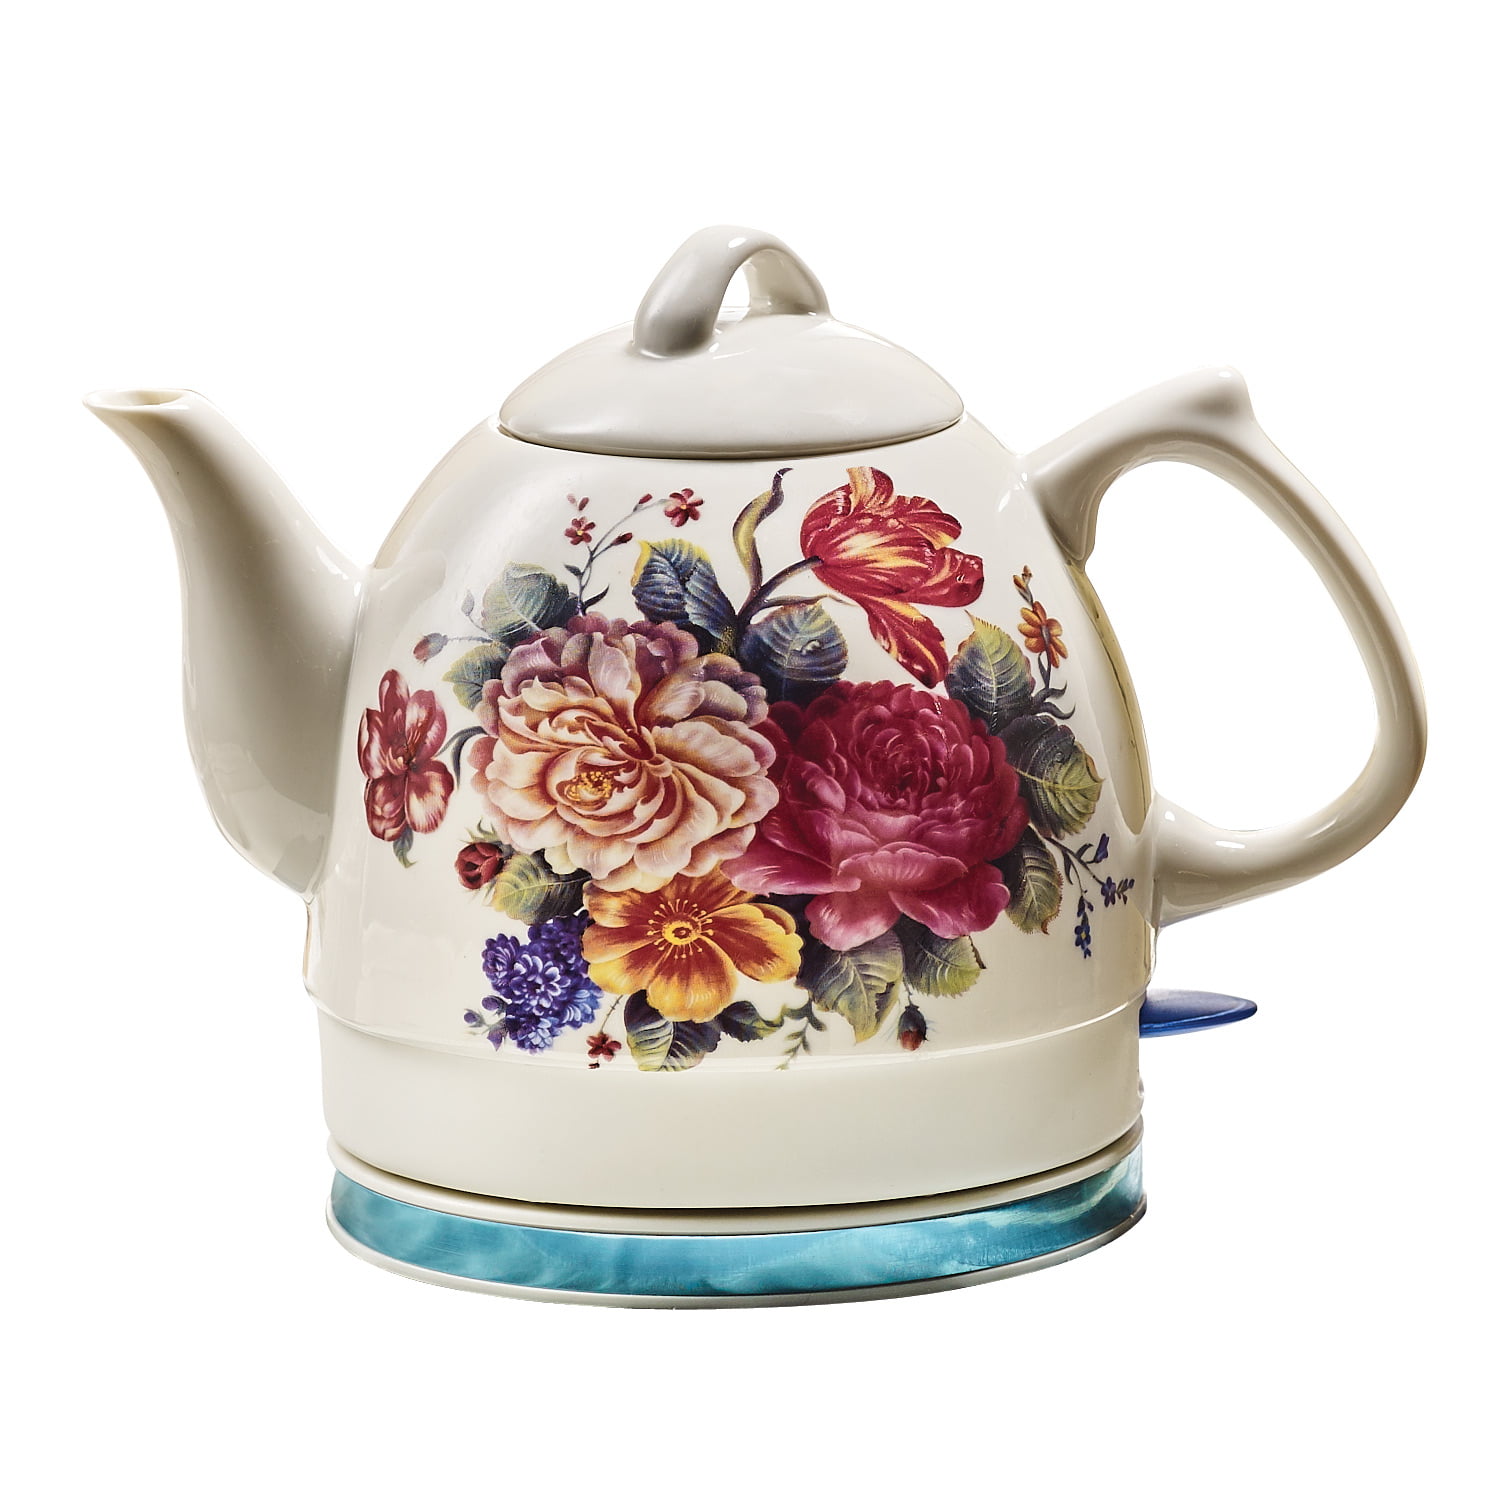 English Garden Electric Tea Kettle White Ceramic With Floral Rose